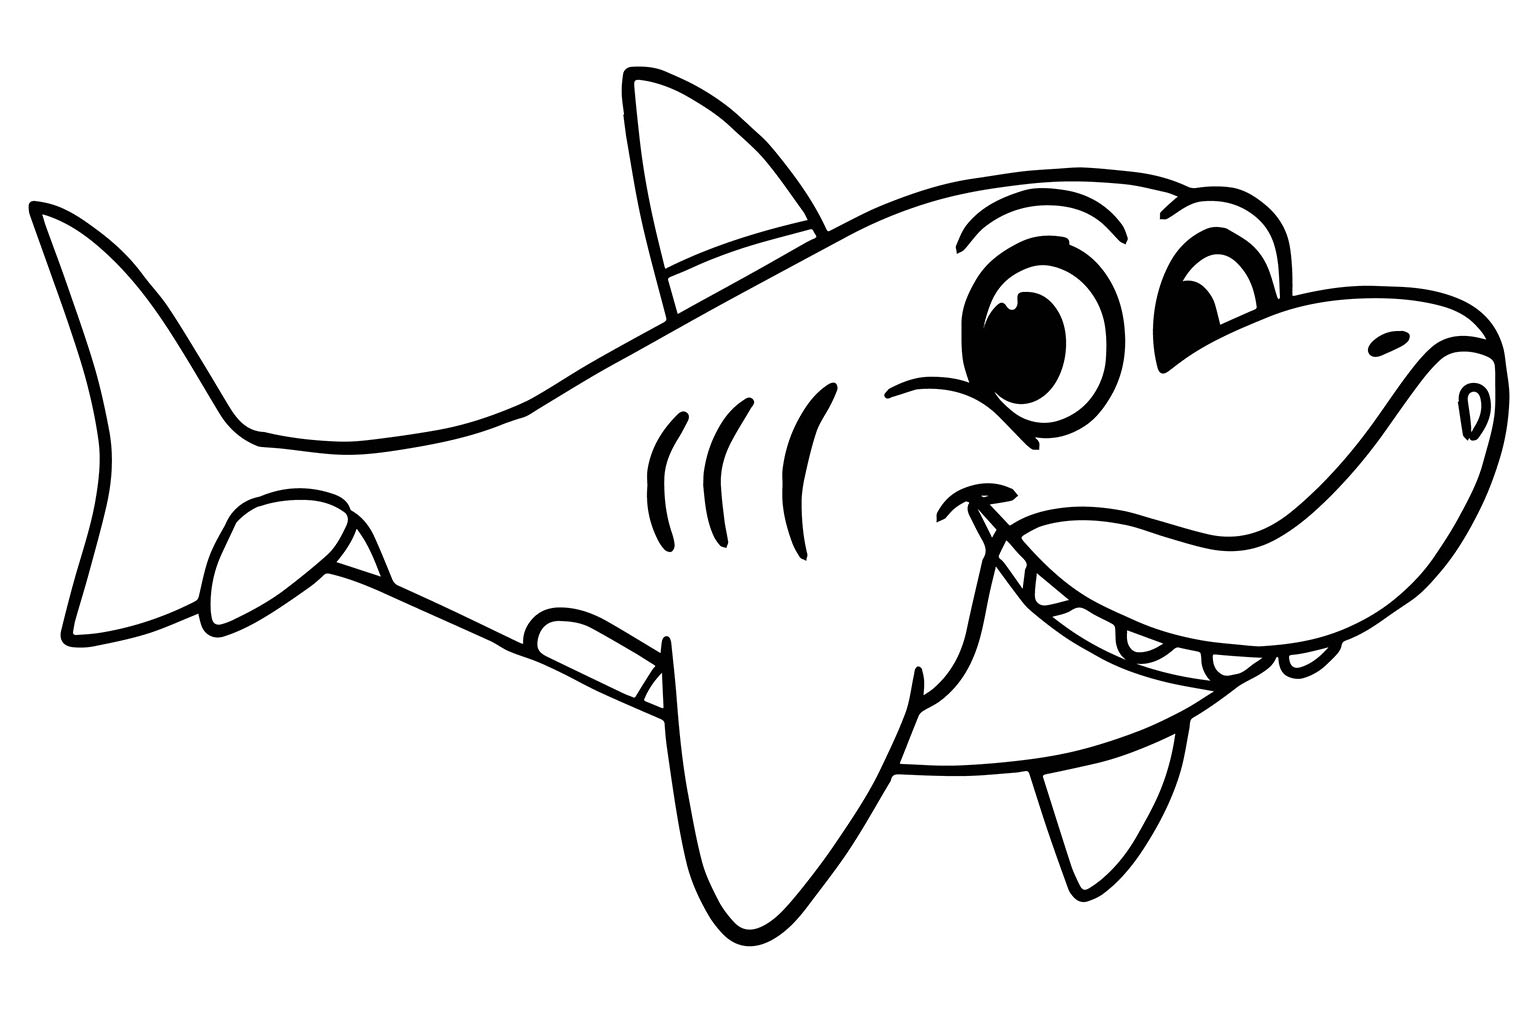 Sharks to color for children - Sharks Kids Coloring Pages